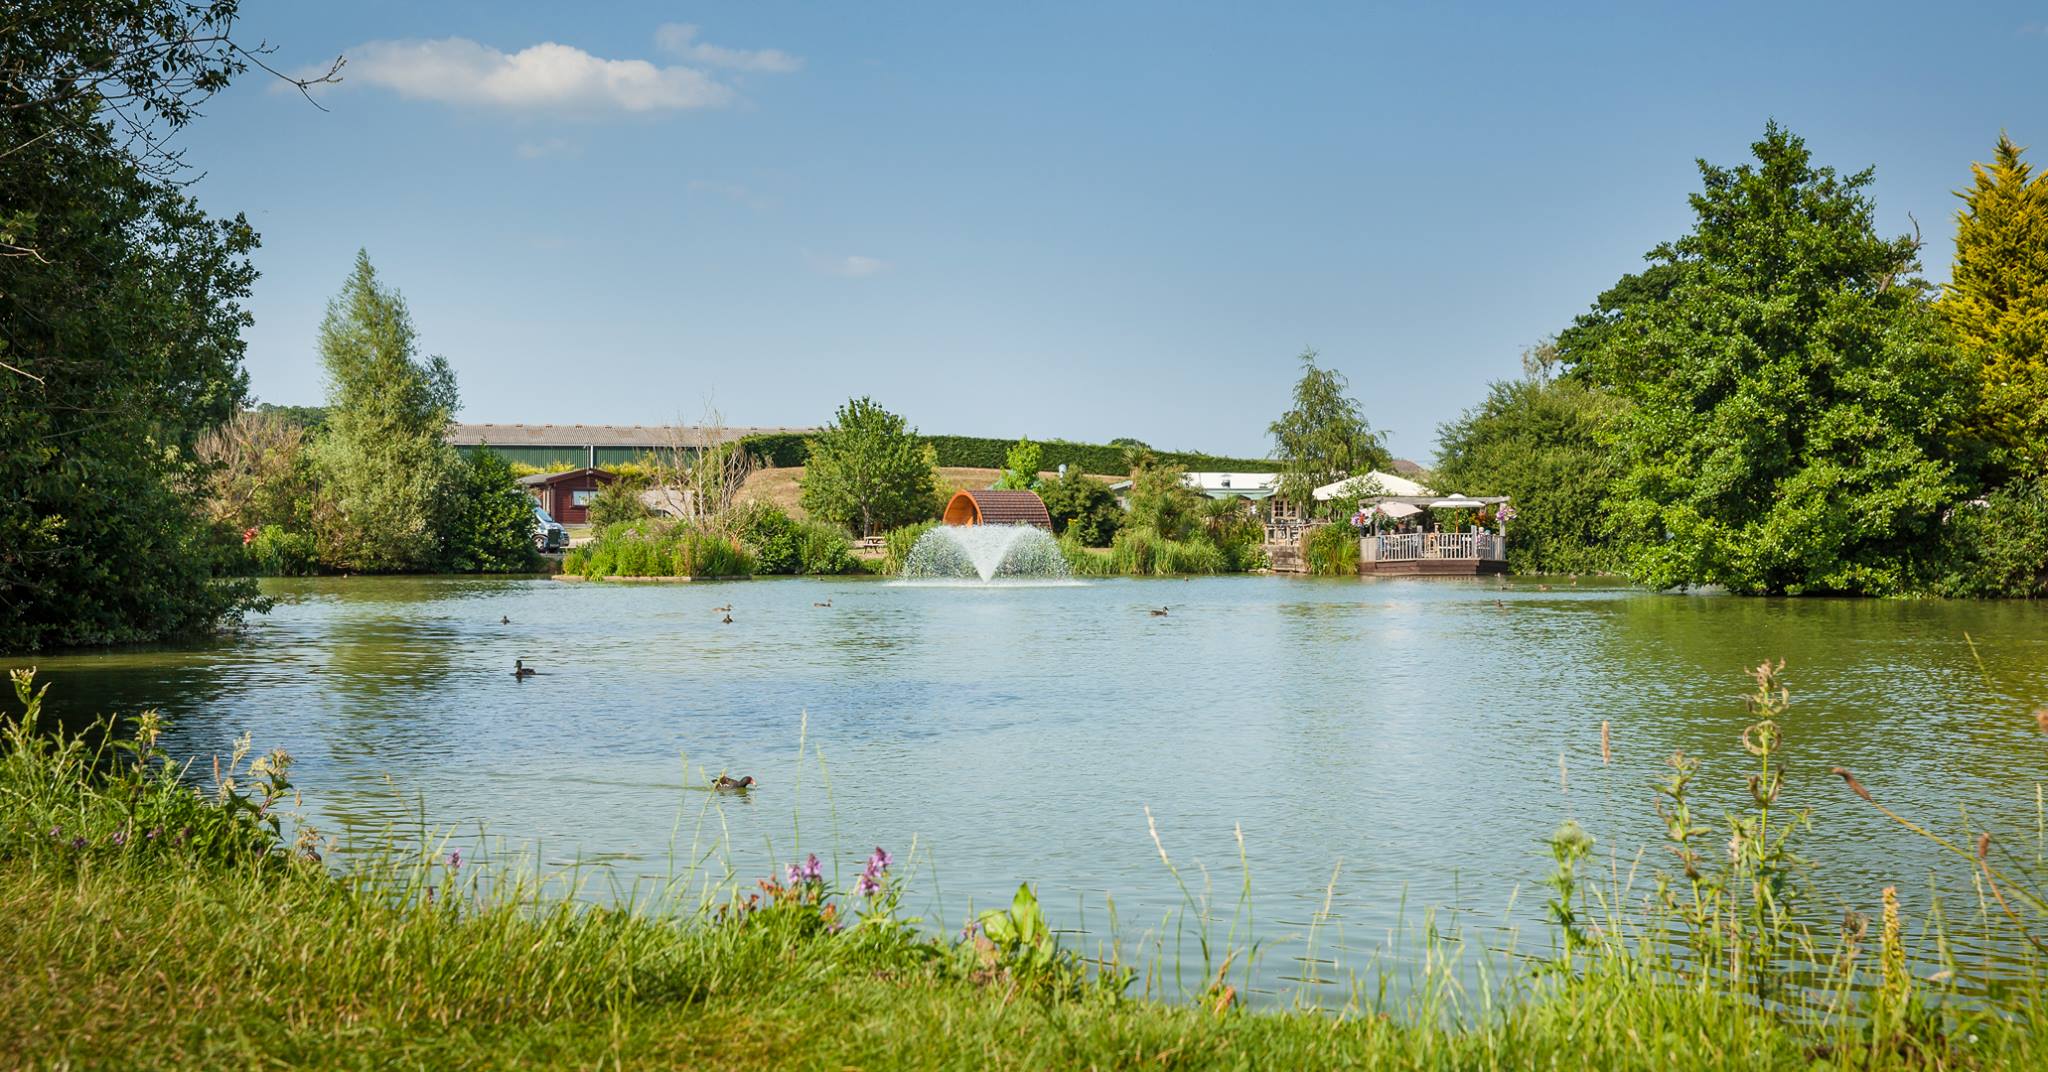 Sumners Ponds campsite and fishery